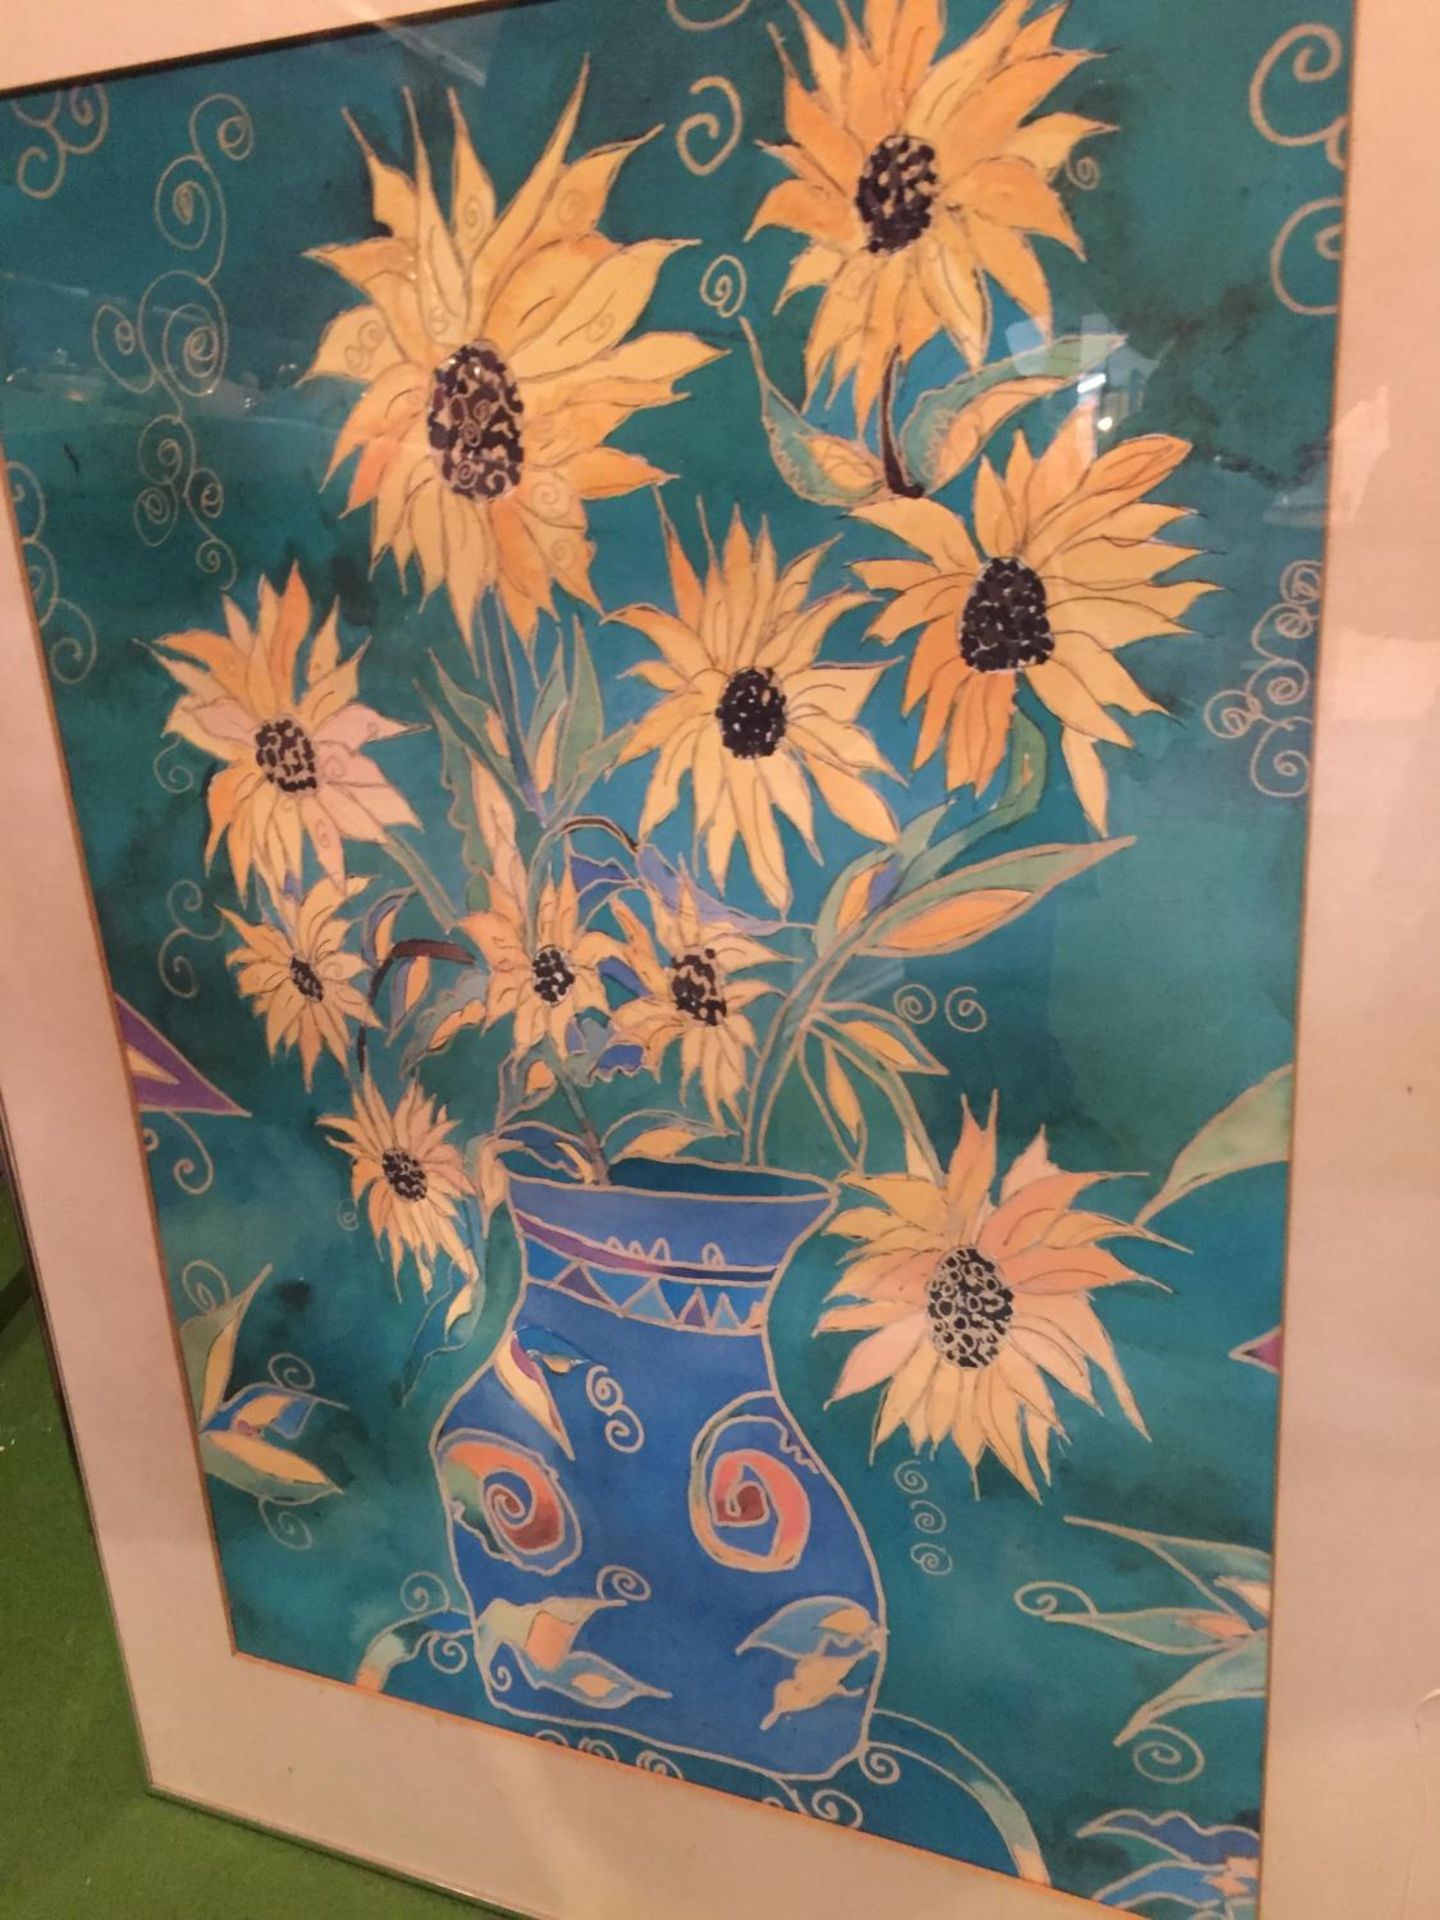 A LARGE FRAMED PRINT OF SUNFLOWERS IN A VASE - Image 4 of 6